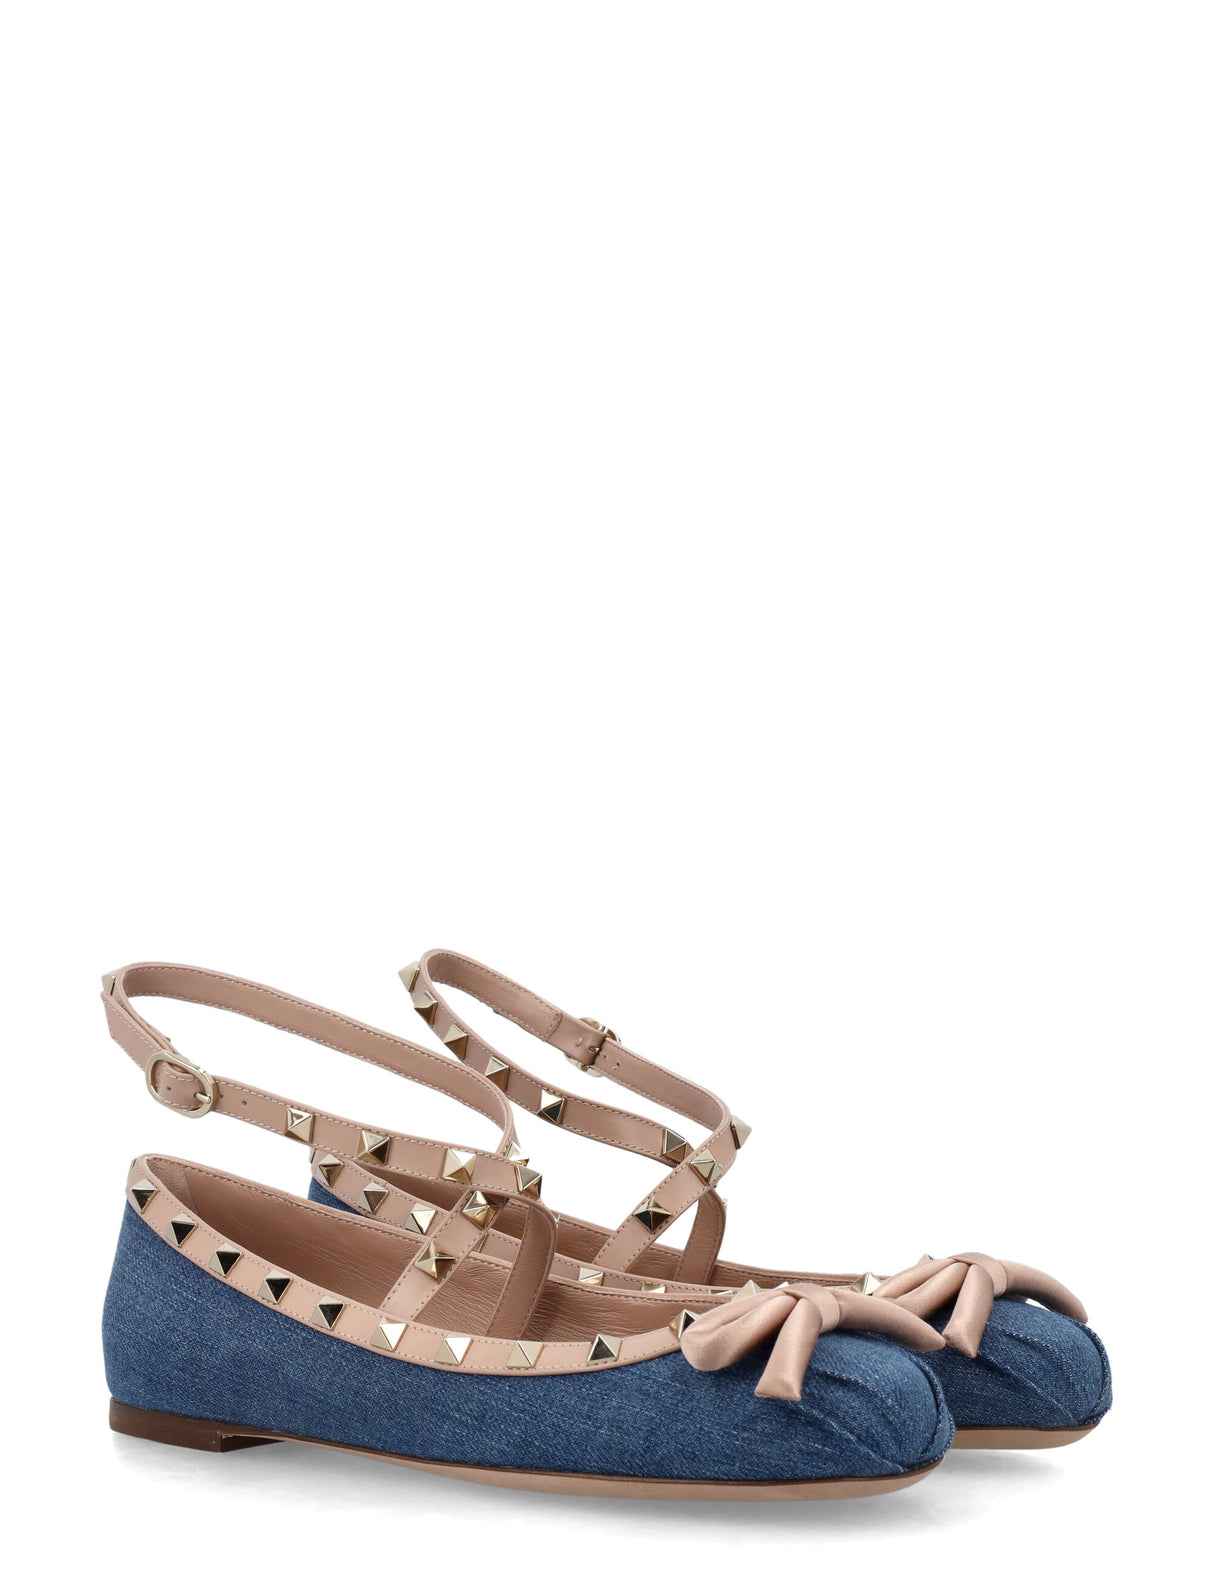 Denim Rockstud Flats in Rose and Canelle for Women